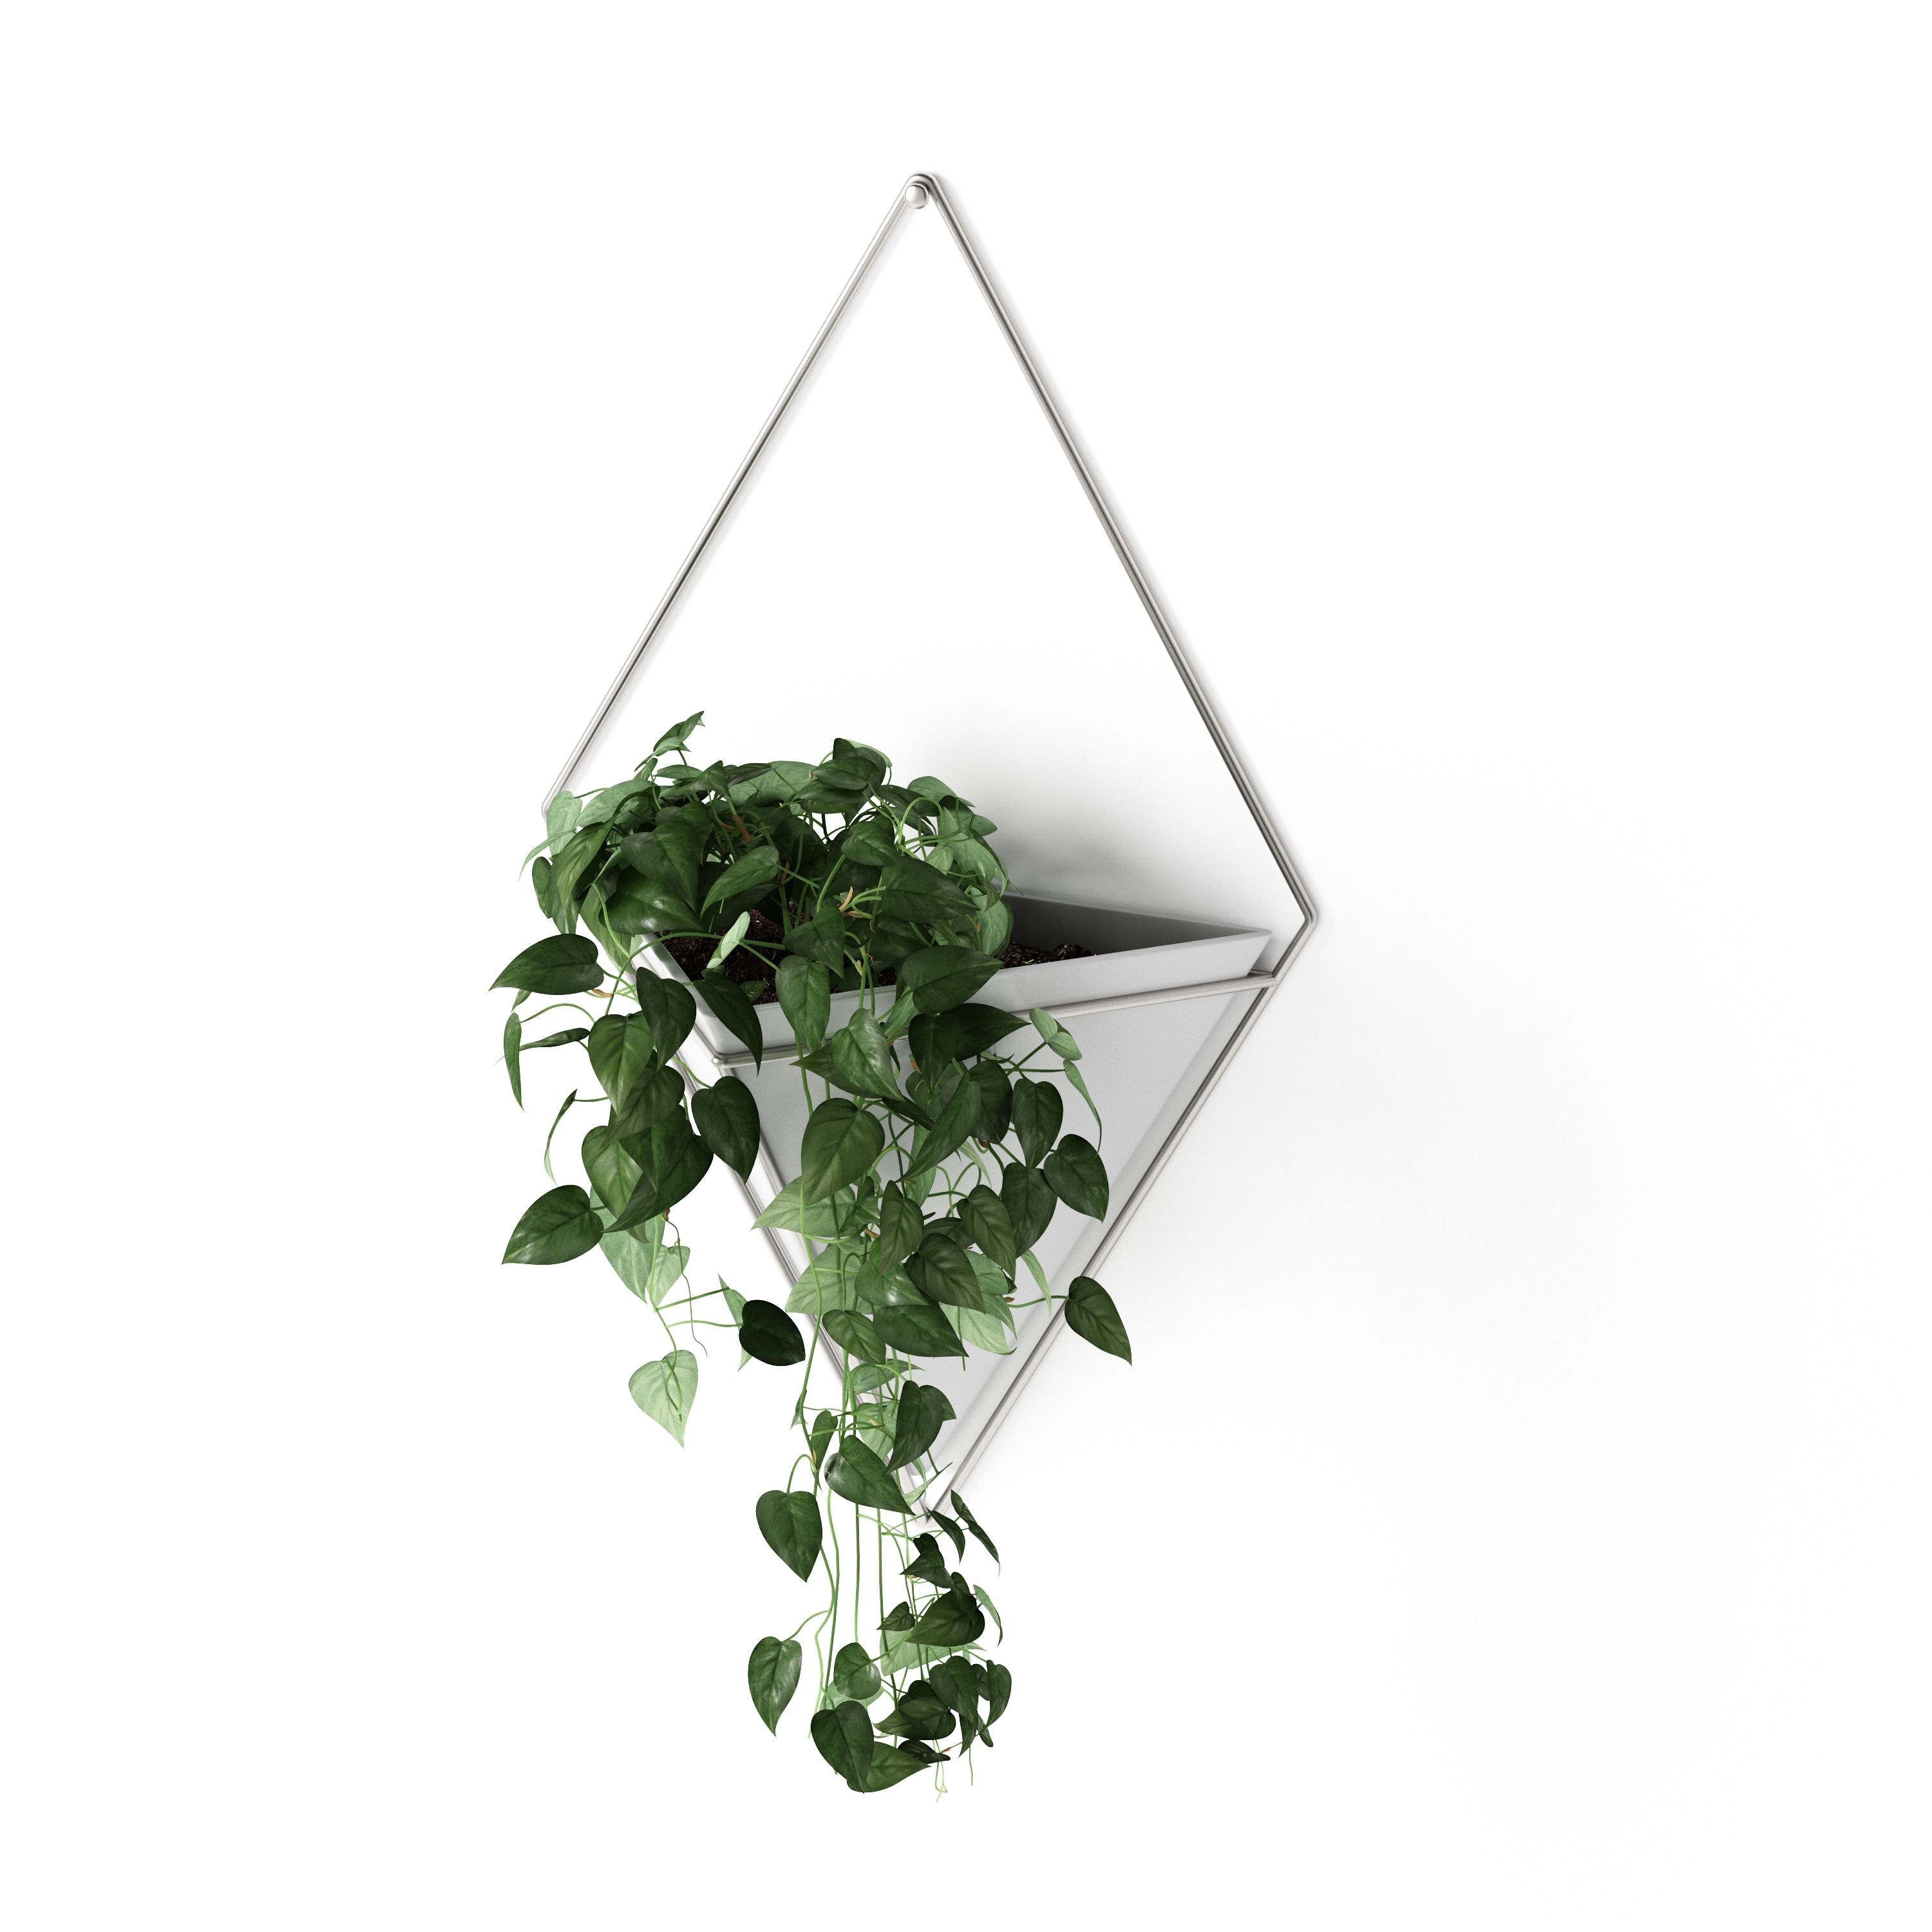 Umbra Trigg Hanging Planter Vase Geometric Wall Decor Container Great for of for sale online 